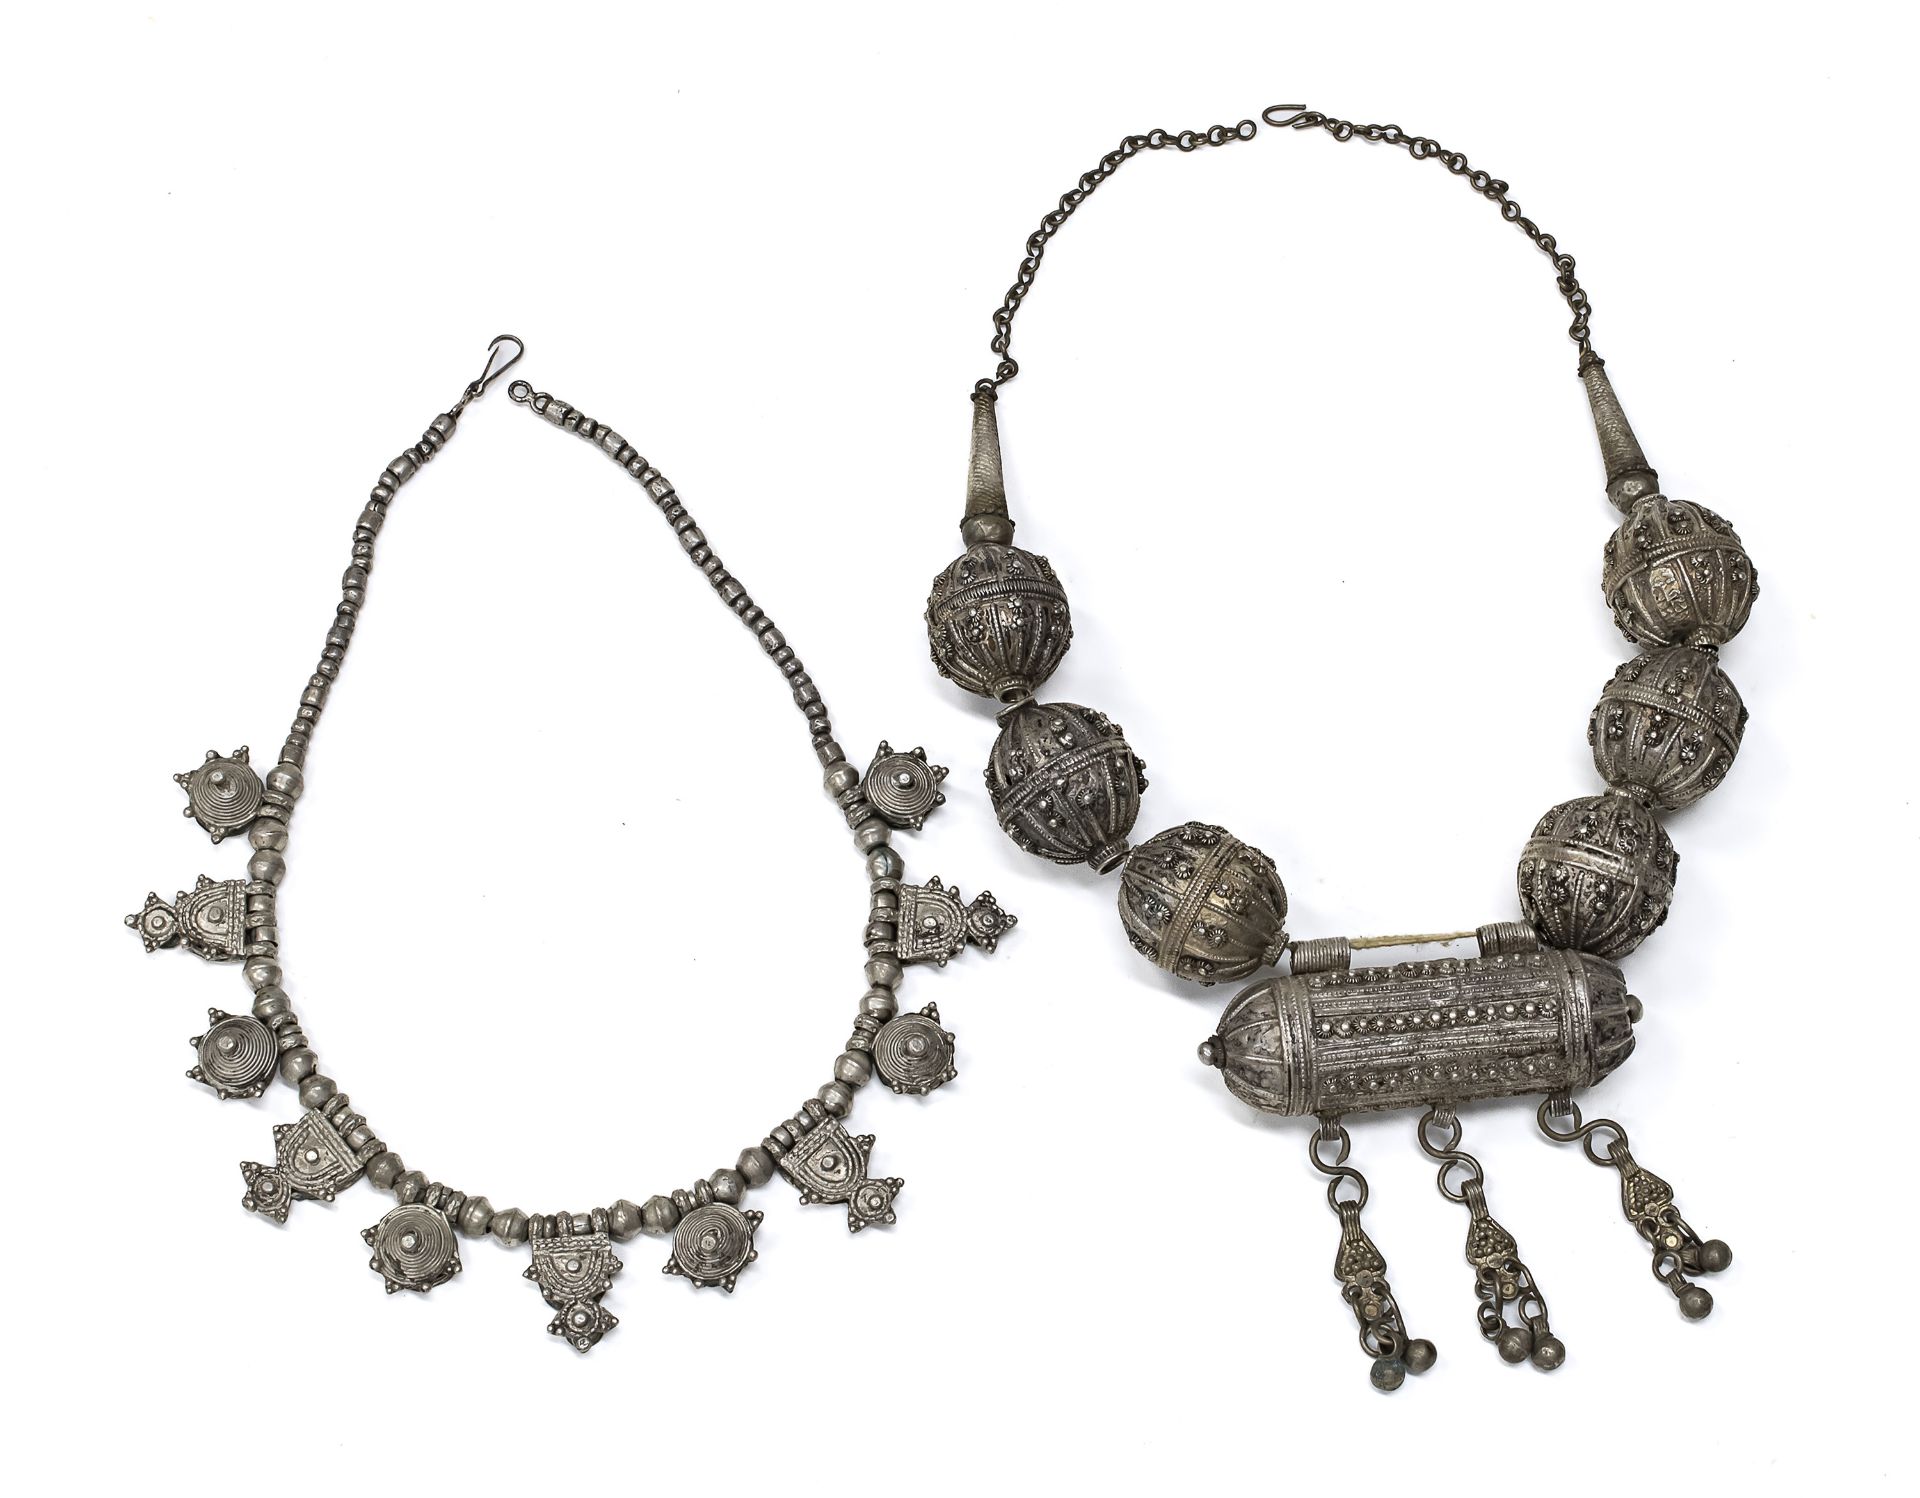 TWO SILVER-PLATED COLLIERS PROBABLY INDIA EARLY 20TH CENTURY